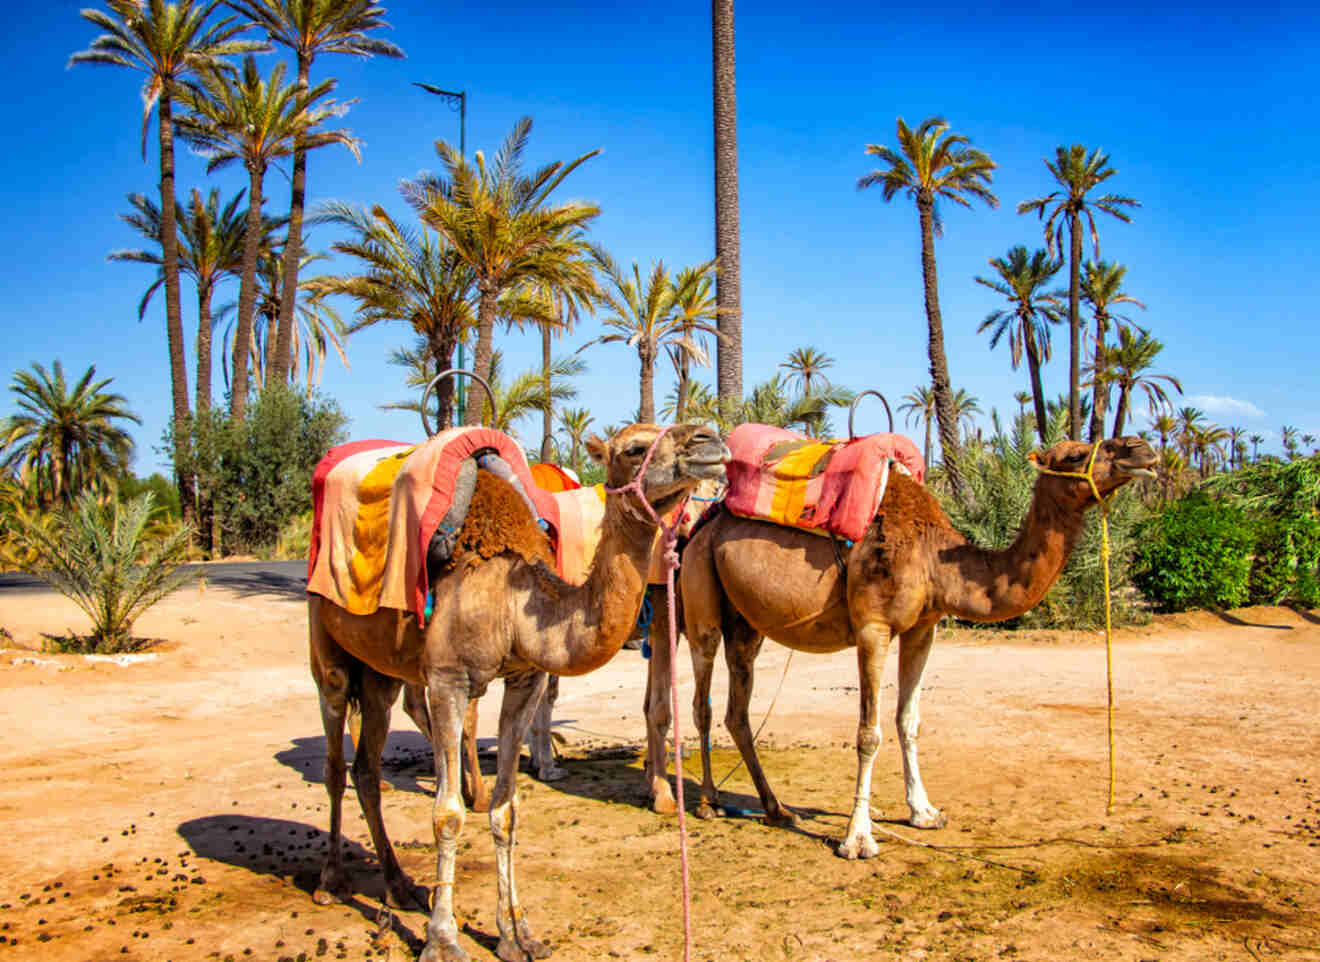 Two camels with traditional saddles standing in the sunlit Palmeraie area of Marrakech, surrounded by lush palm trees under a bright blue sky